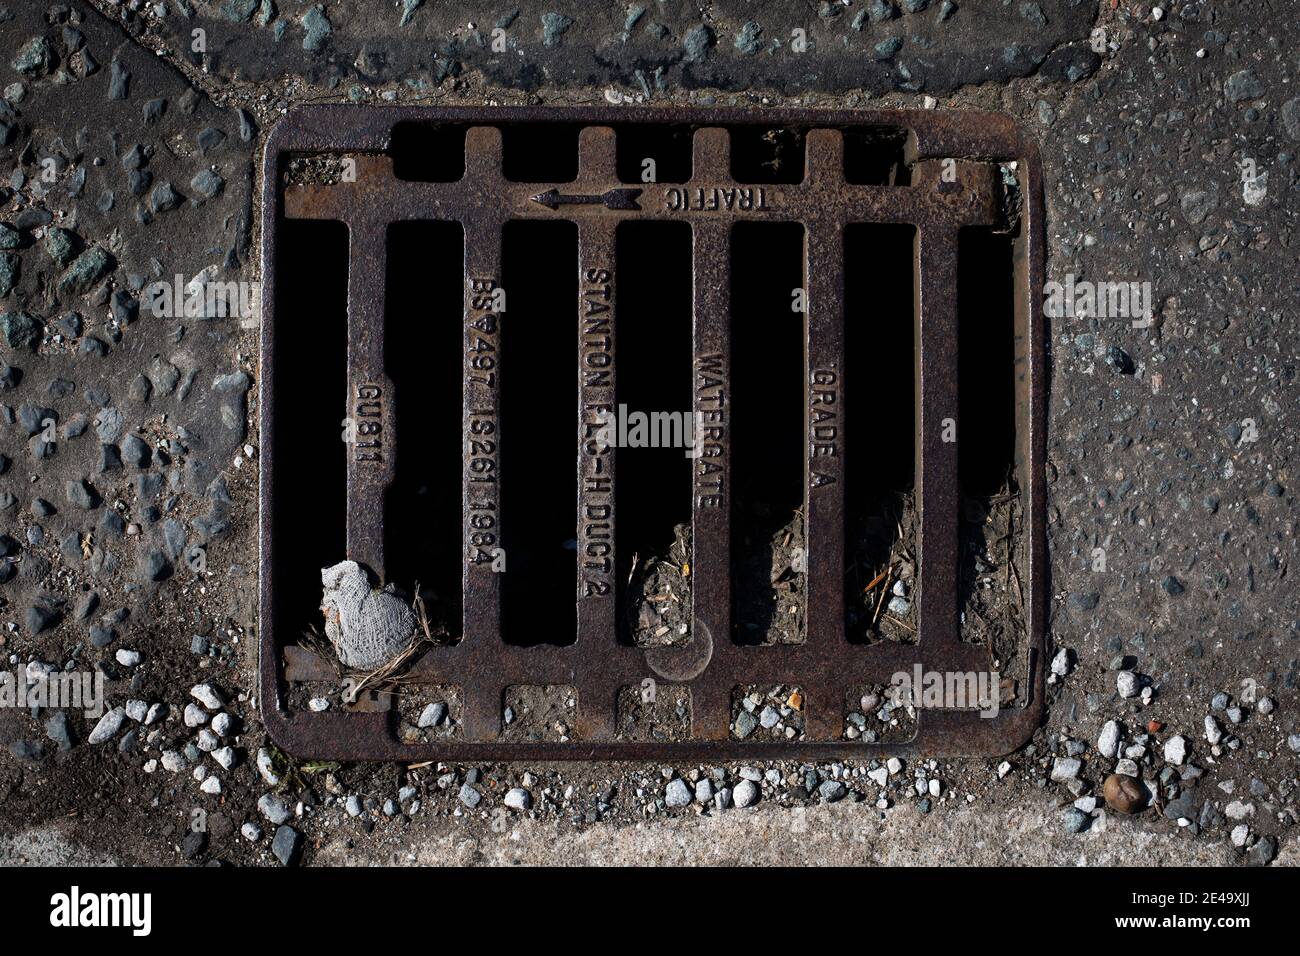 A drain cover pictured on a street in Wirral, England. Stock Photo